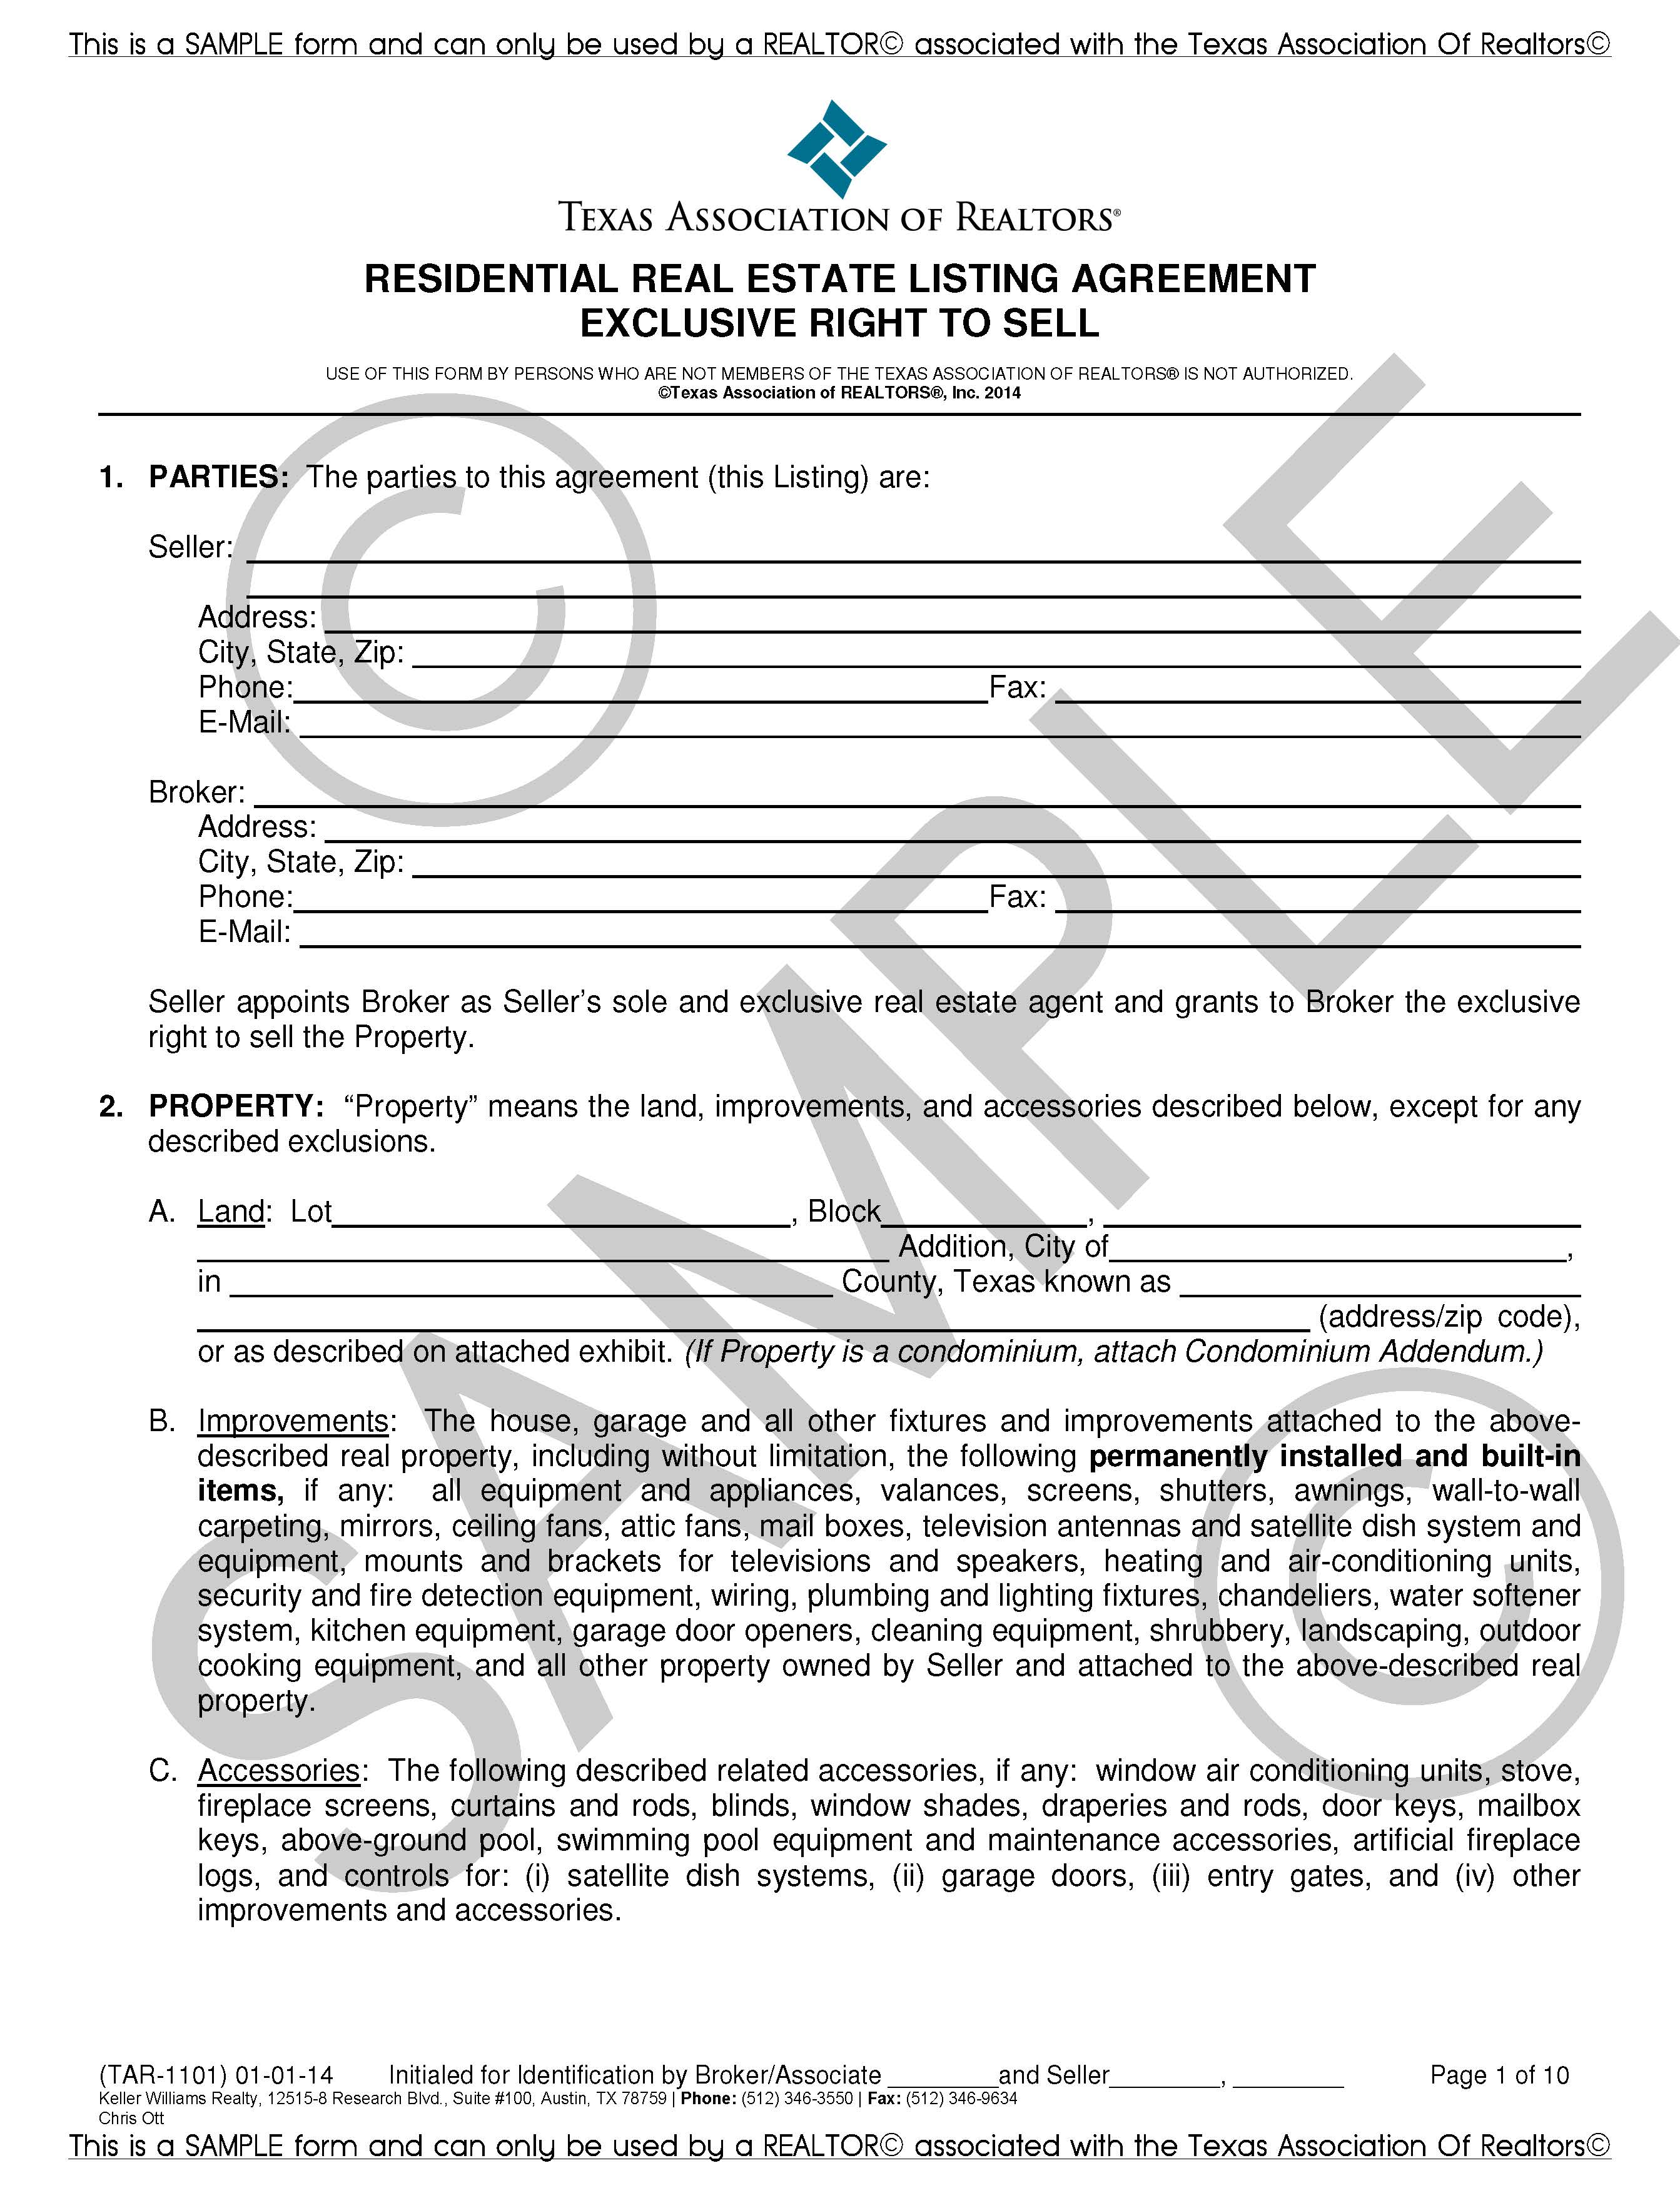 TAR 1101 Residential Real Estate Listing Agreement Exclusive Right 